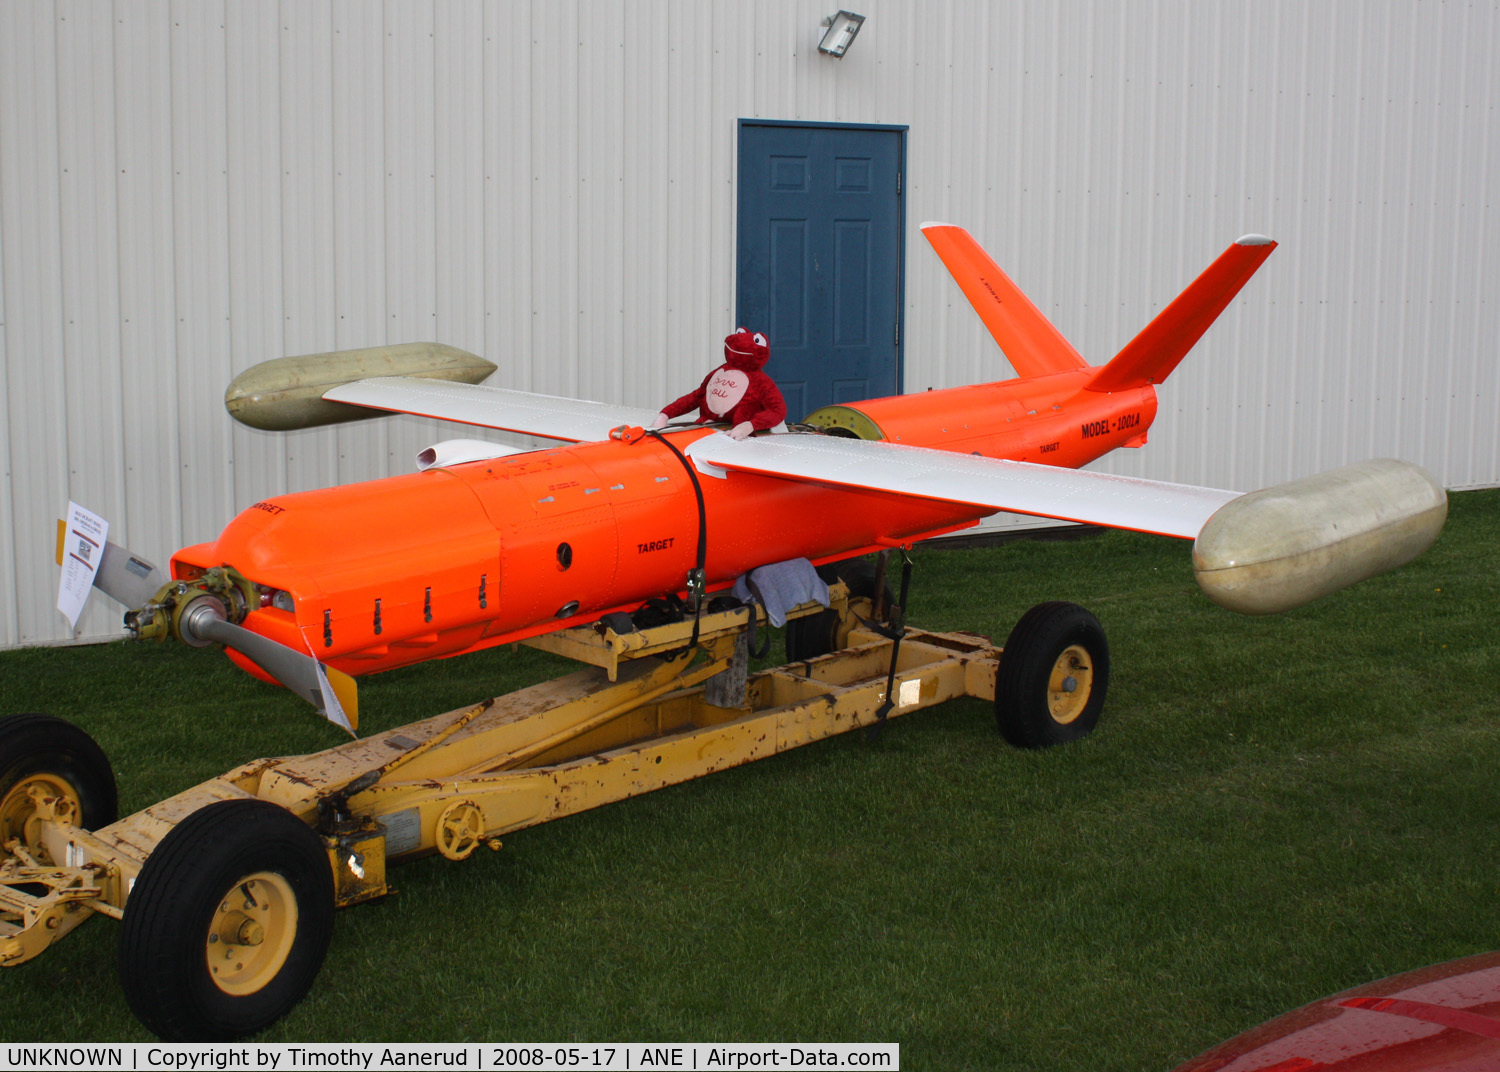 UNKNOWN, , American Wings Museum, Beechcraft Model 1001 (MQM-61A) Drone.  Restored by C&P Aviation